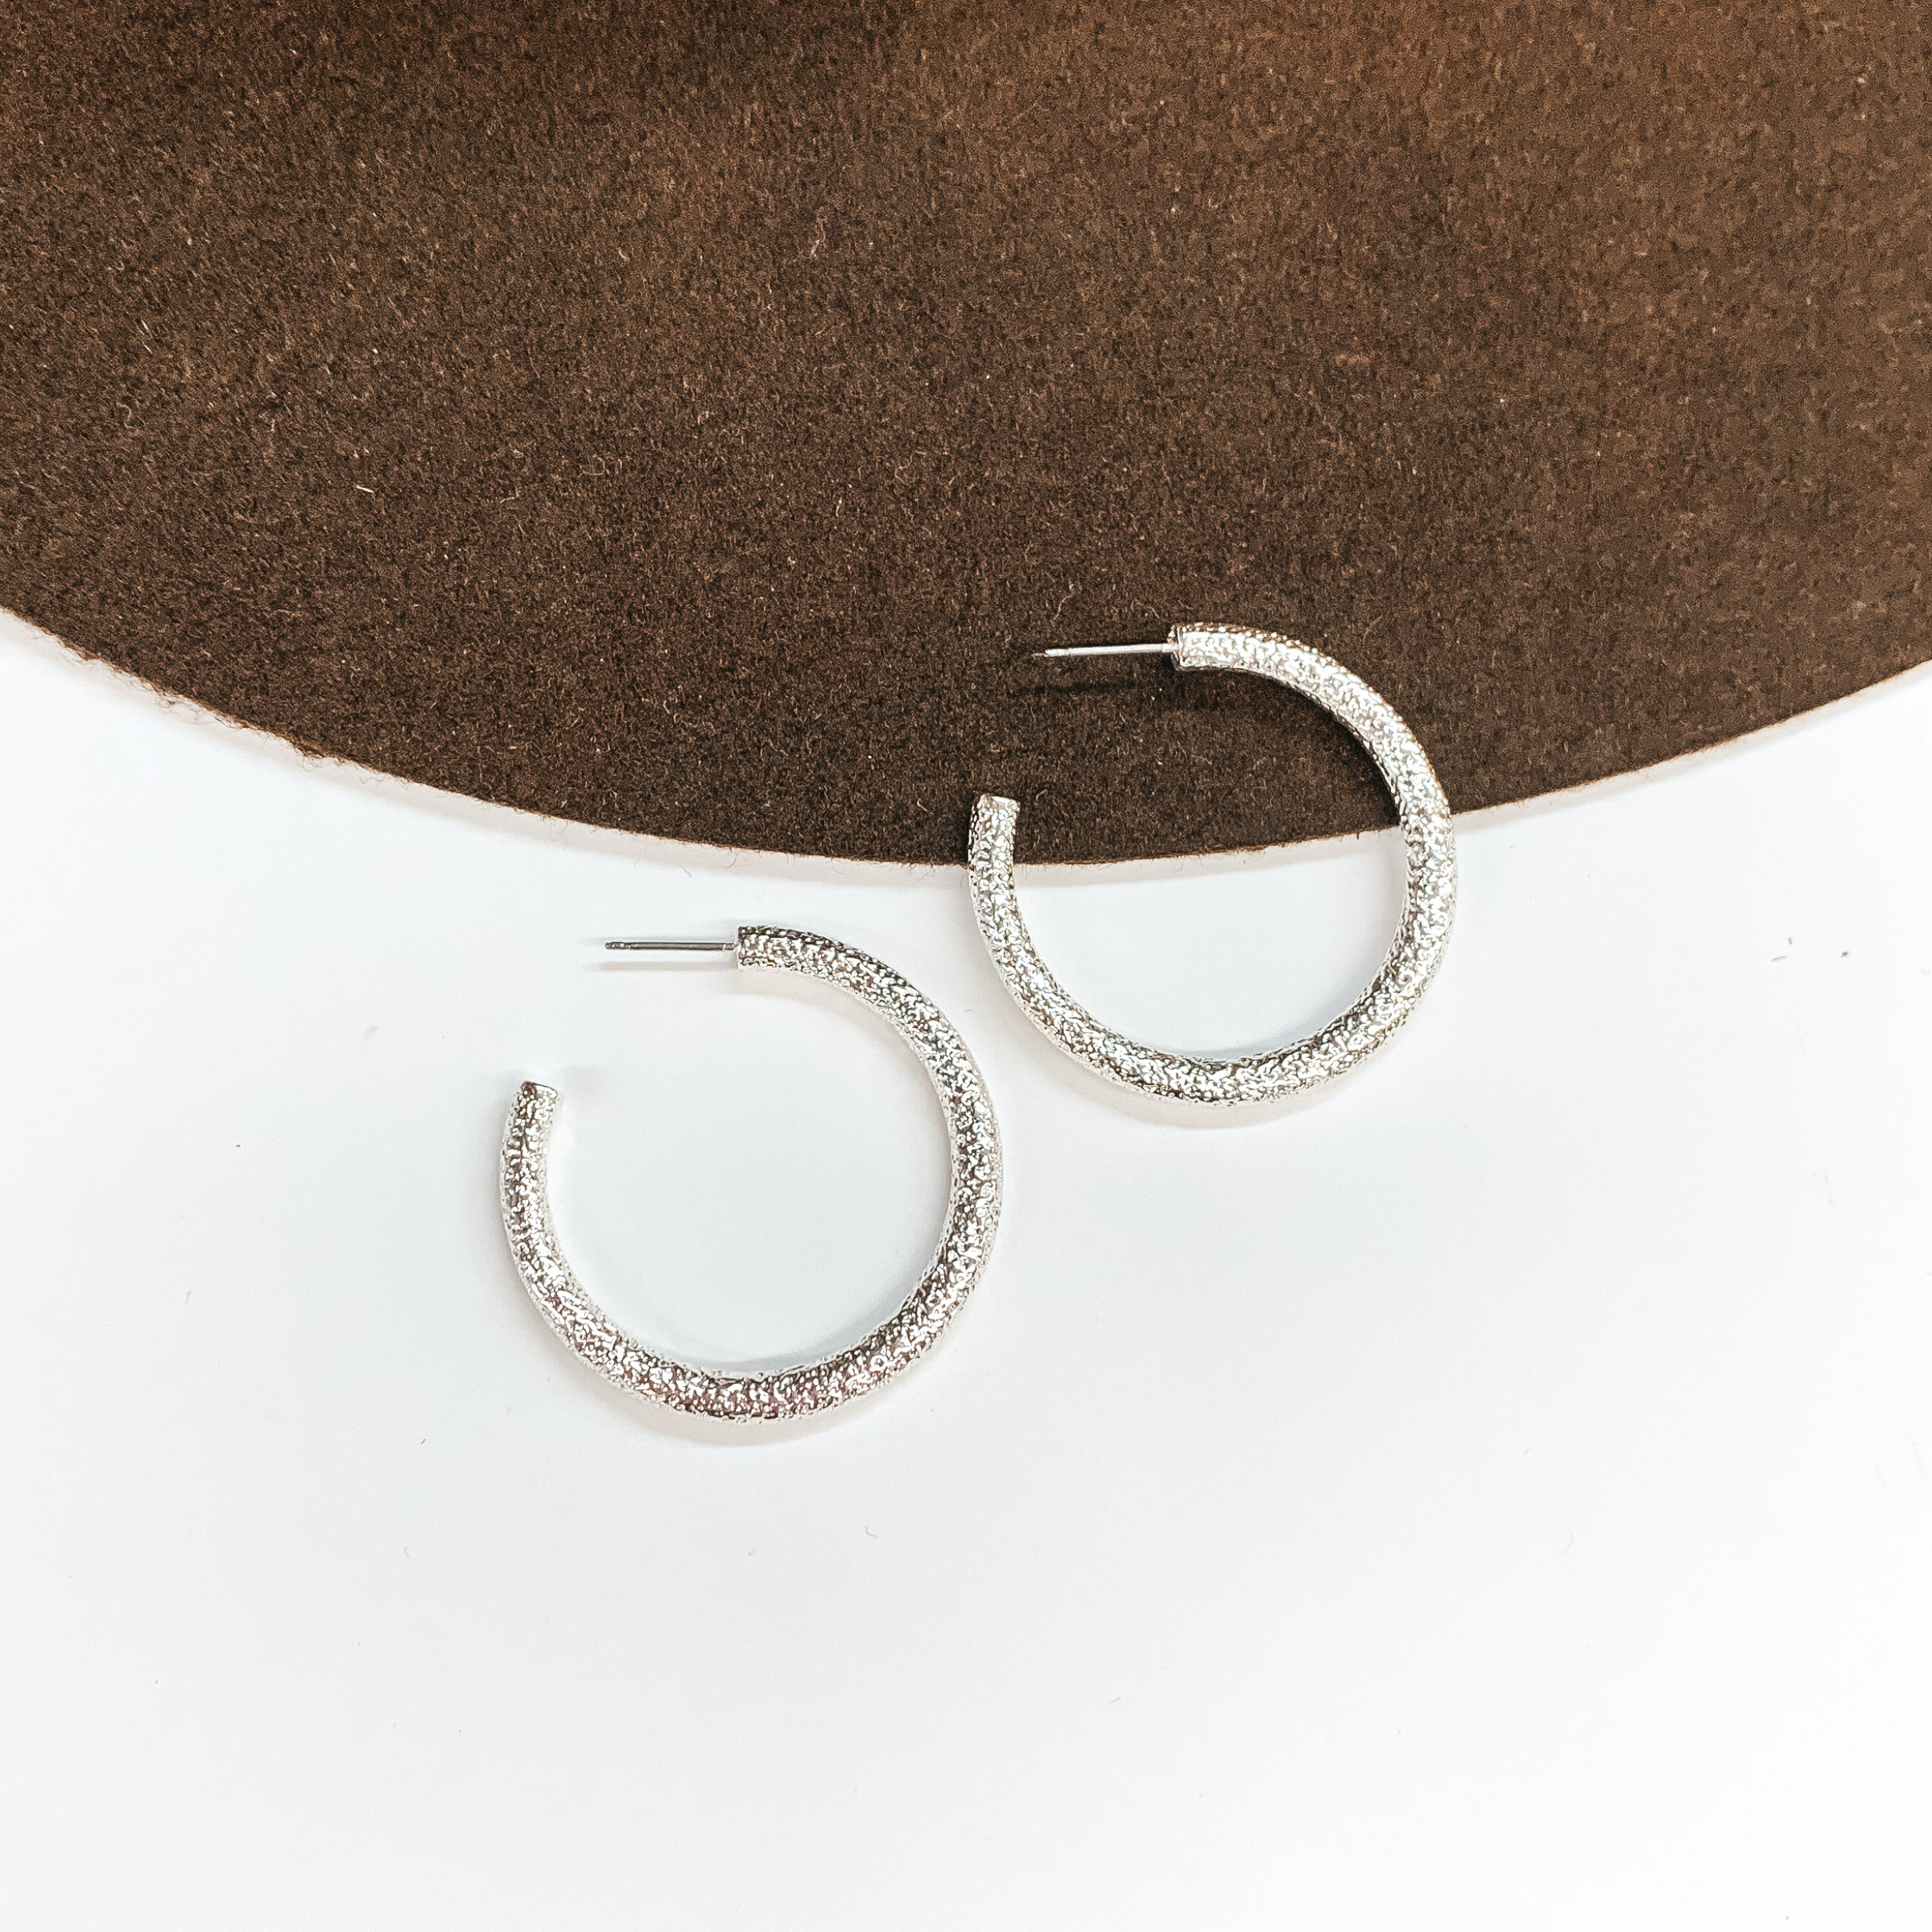 Textured Medium Sized Hoop Earrings in Silver - Giddy Up Glamour Boutique